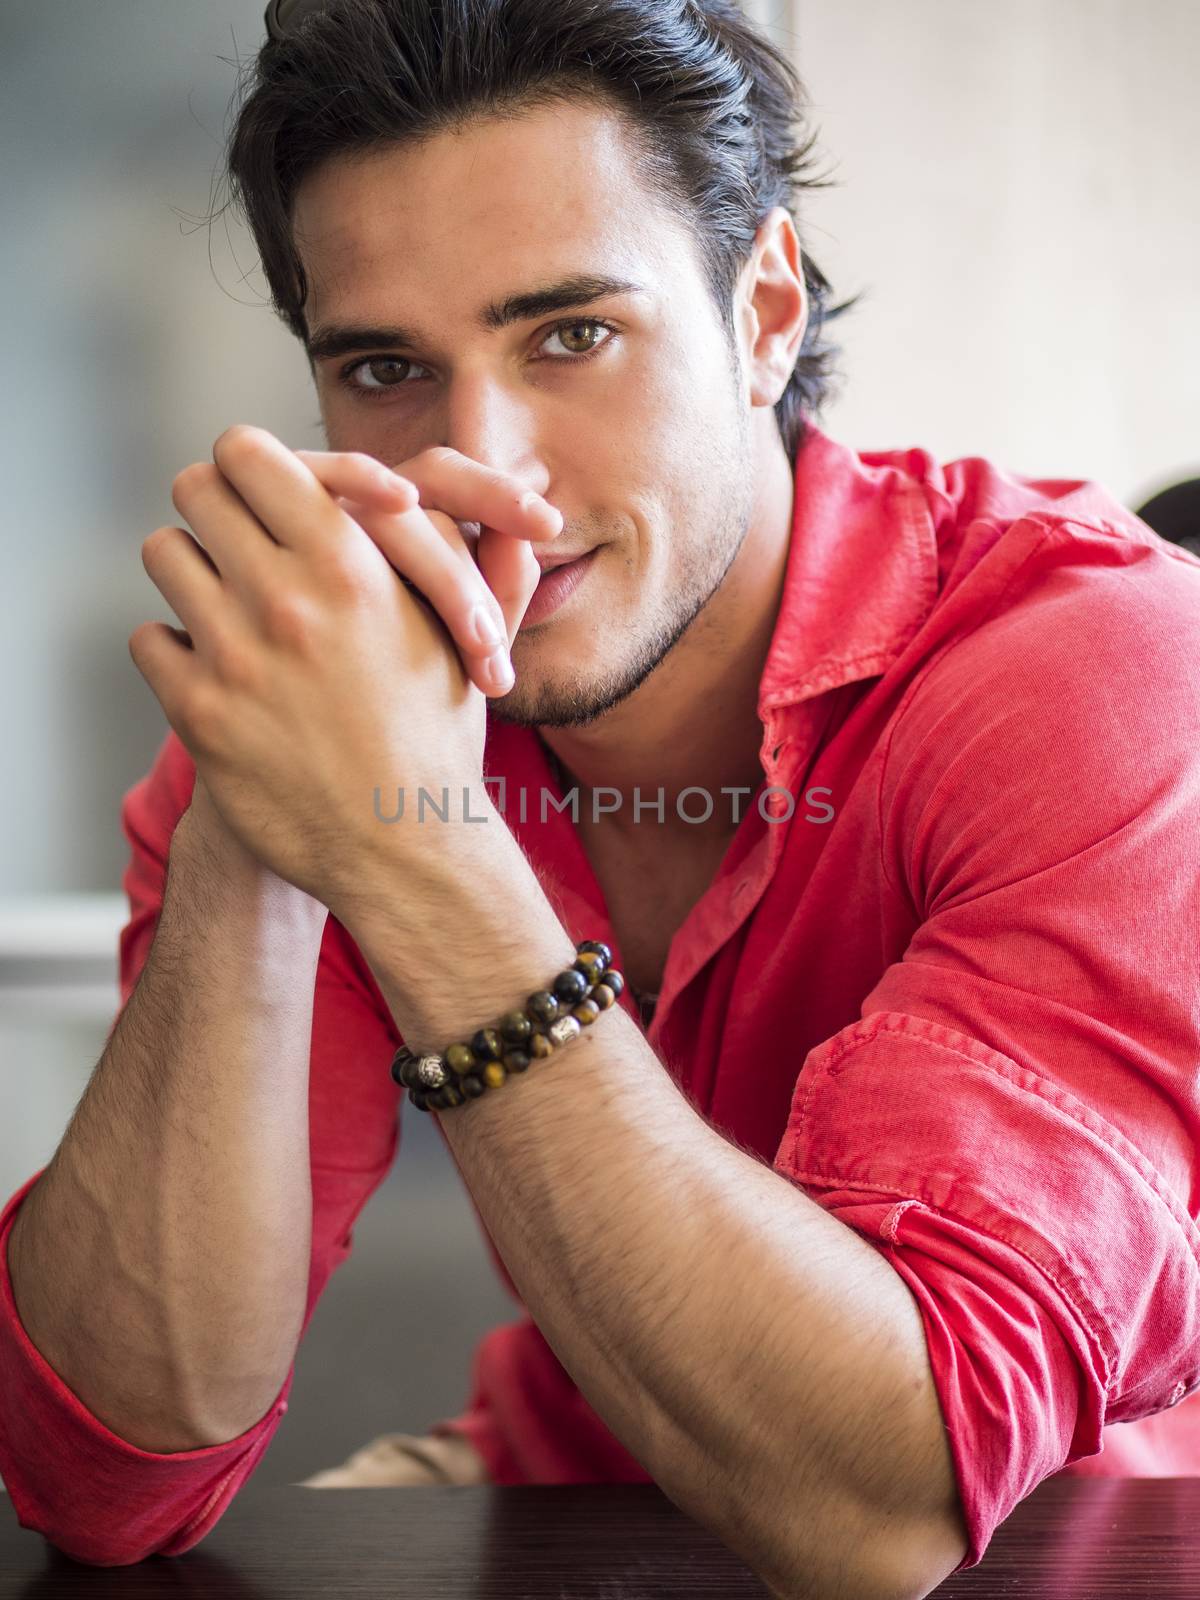 Attractive young man indoors wearing a shirt by artofphoto